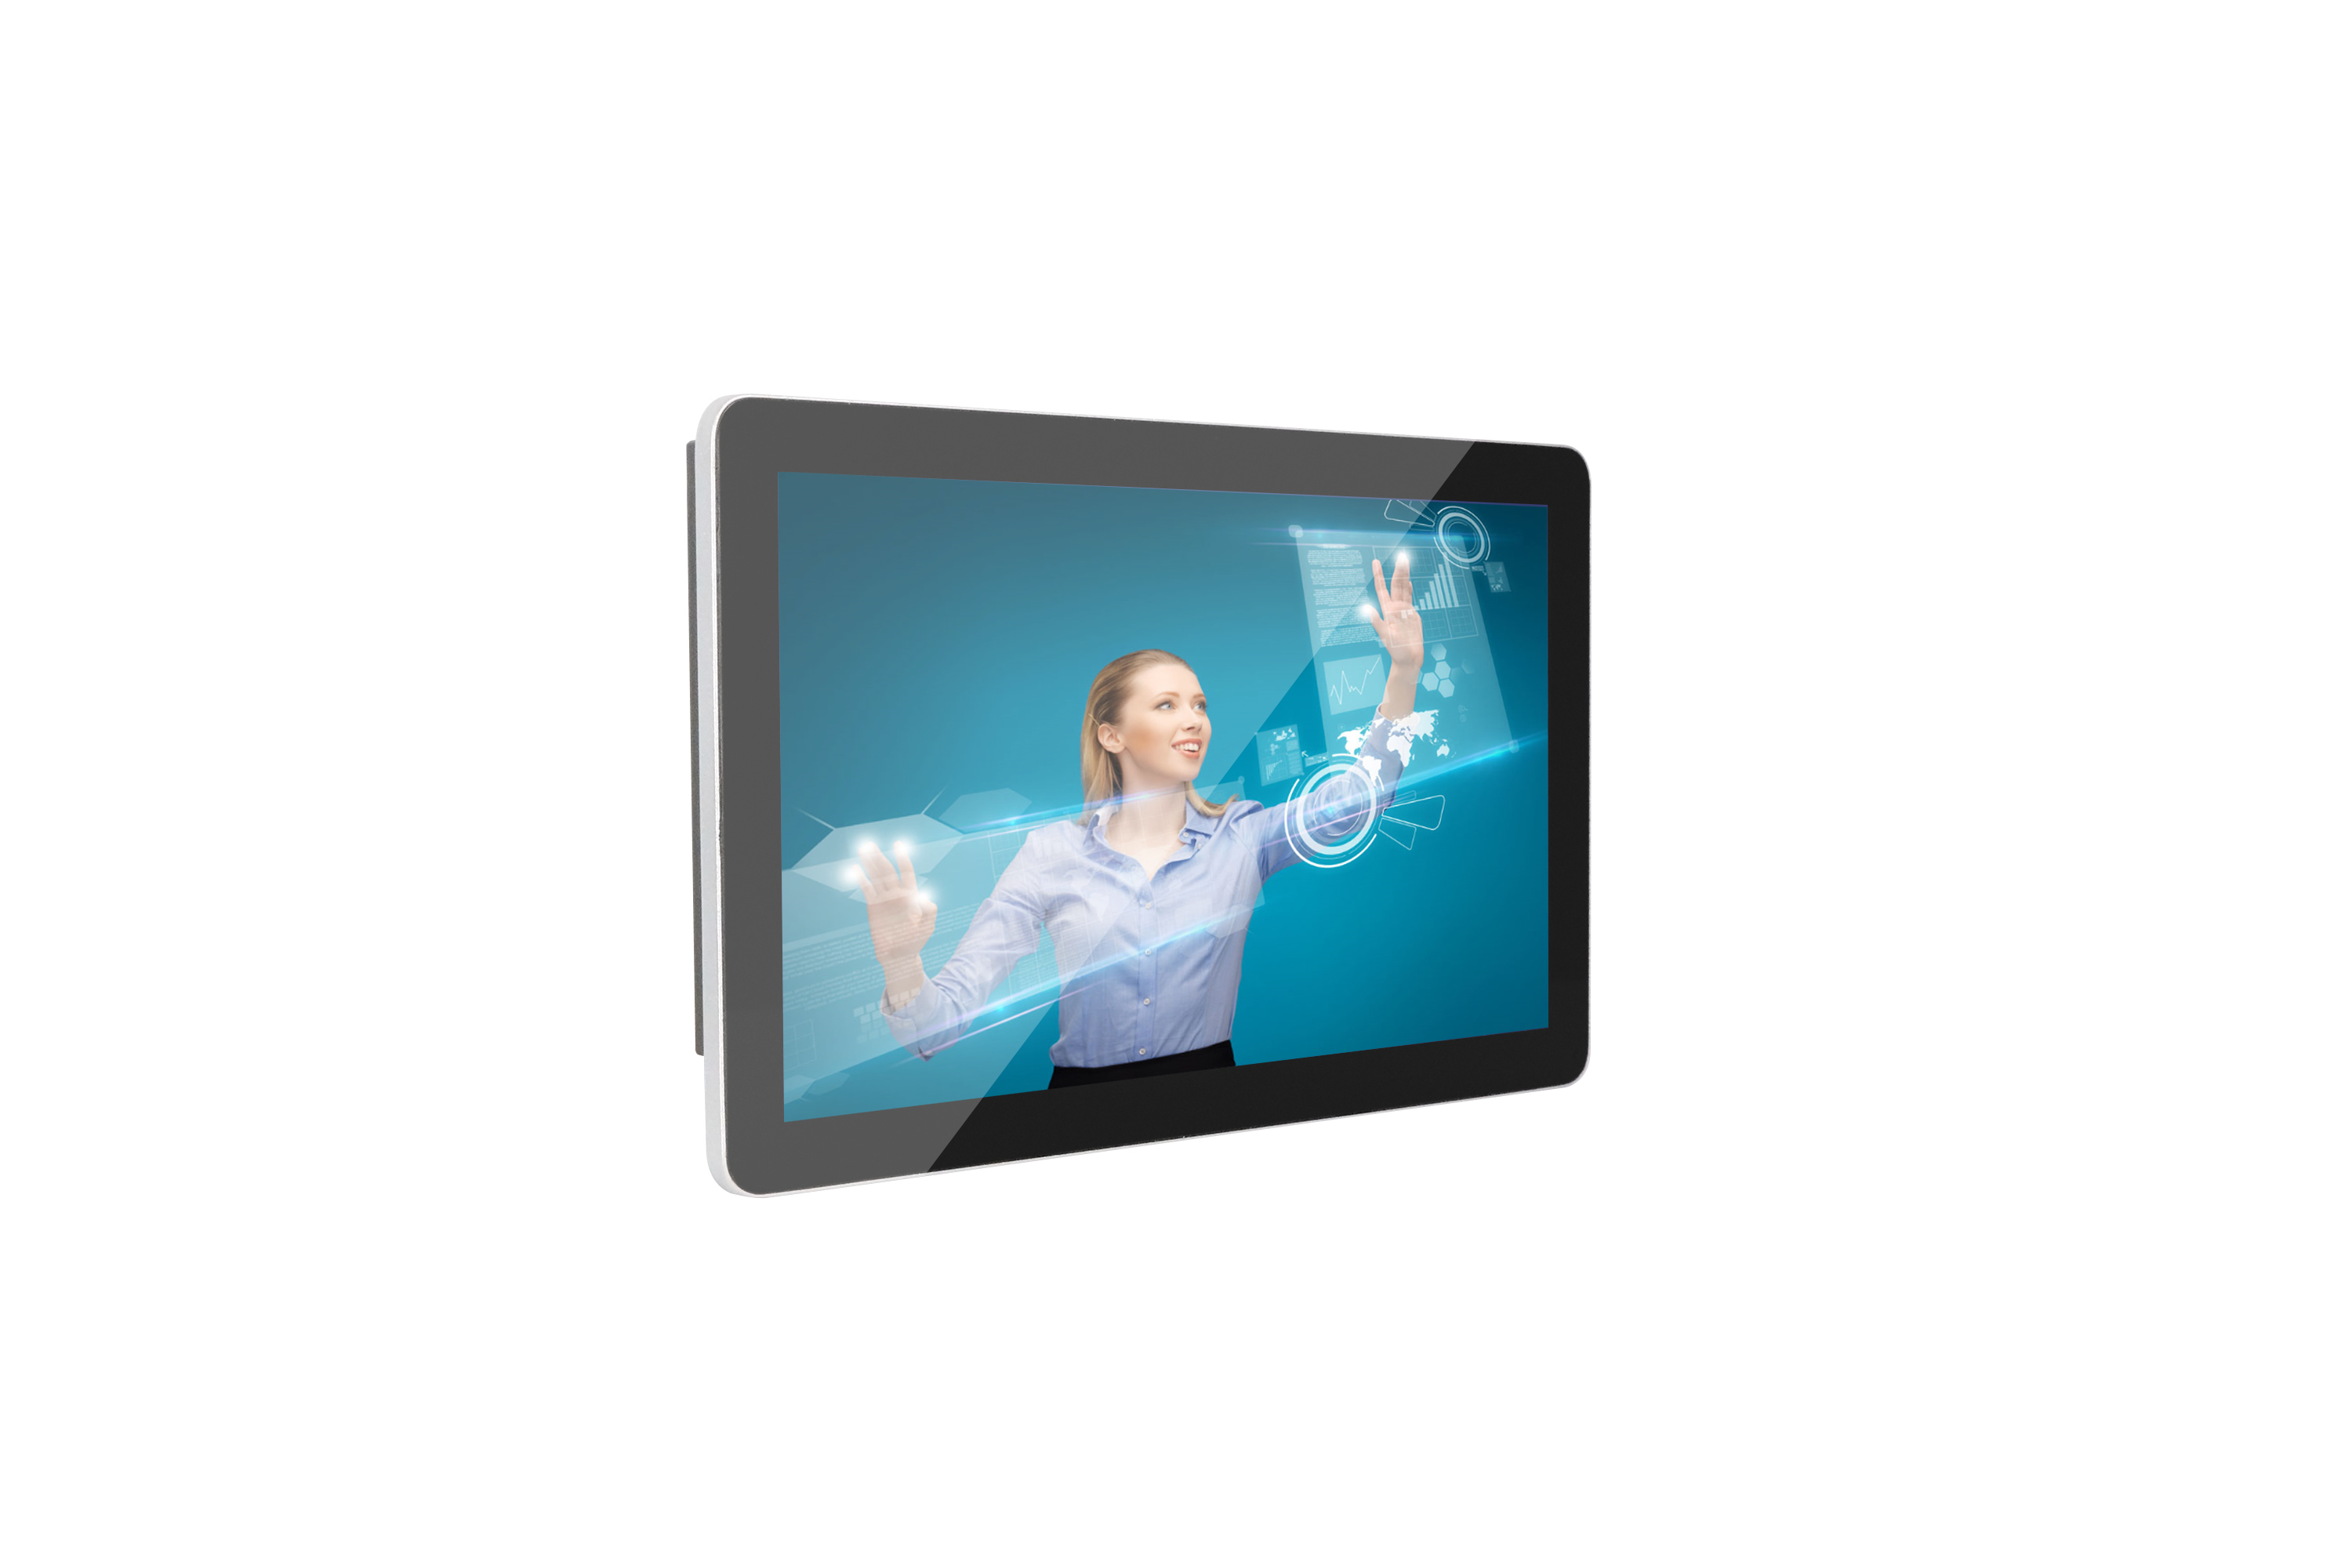 11.6" capacitive touch screen monitor